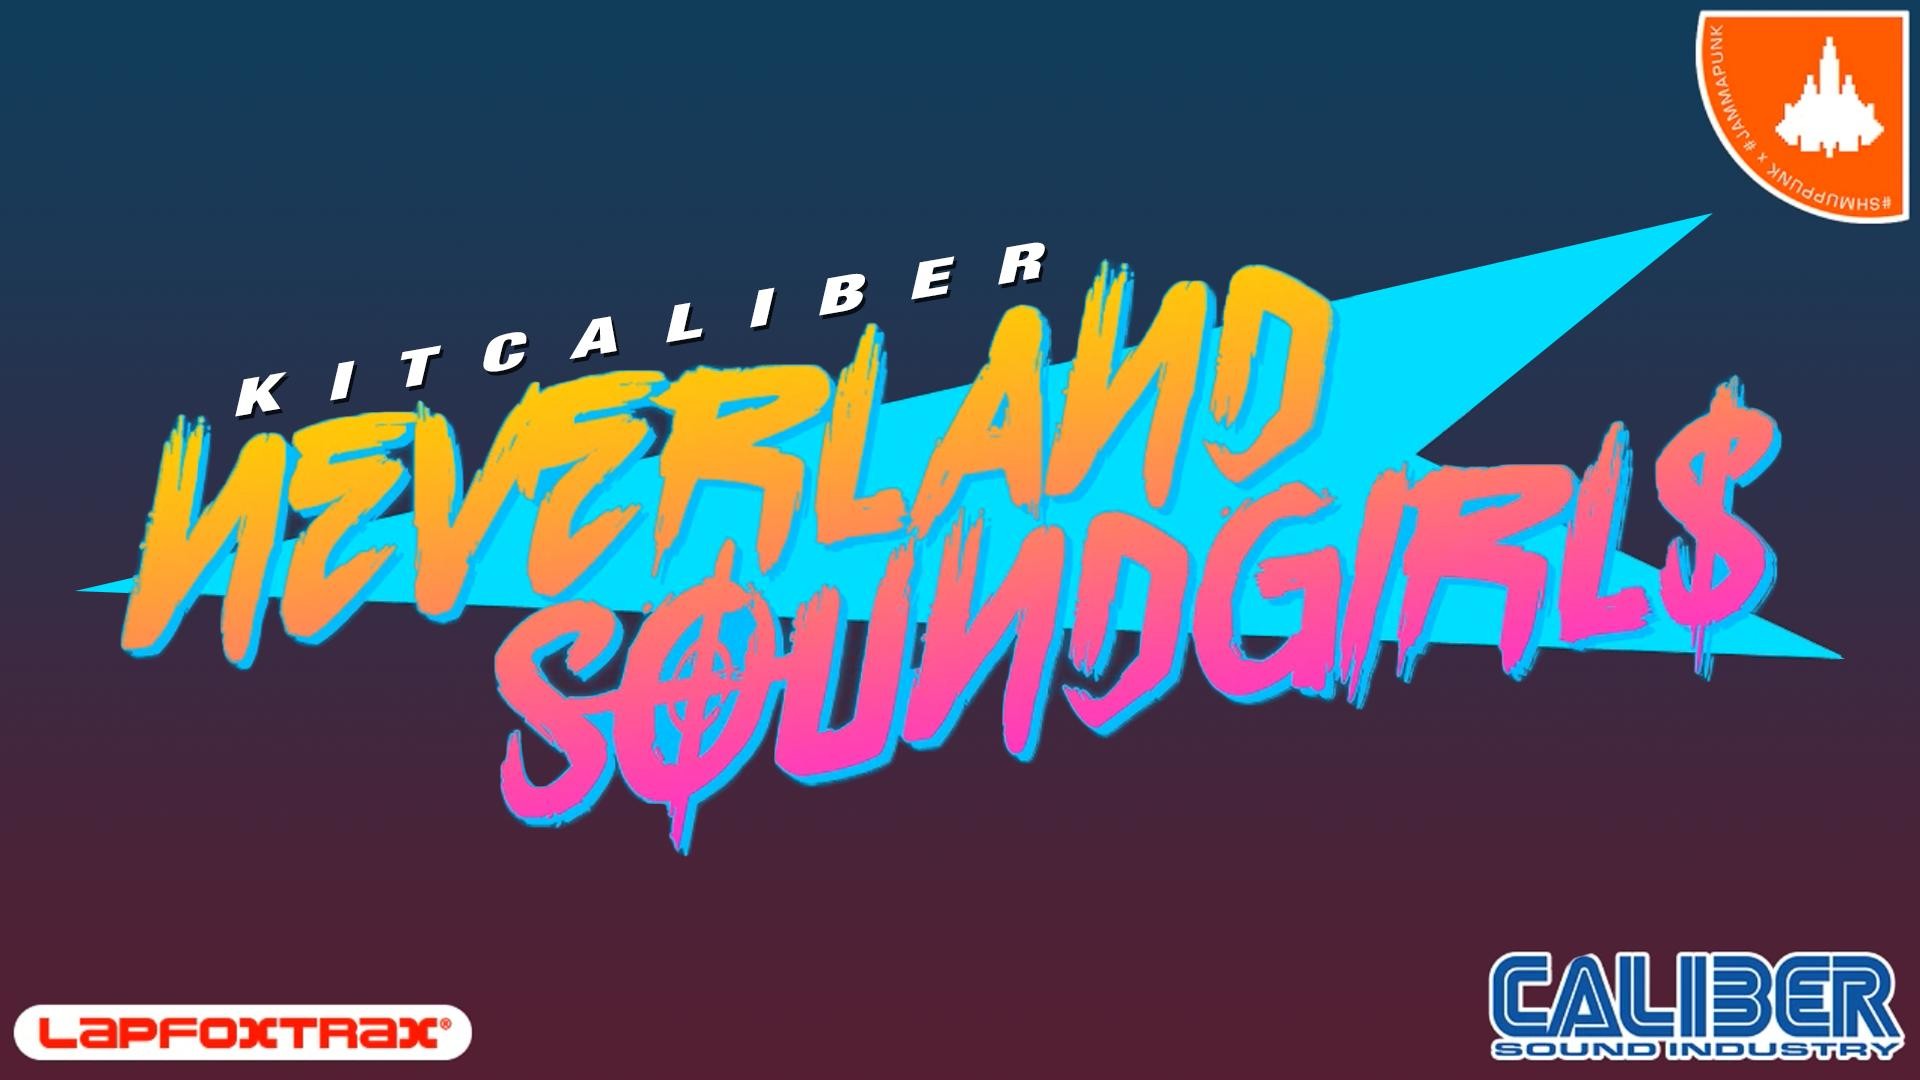 1920x1080 Tried to make a NEVERLAND SOUNDGIRLS wallpaper from the video.